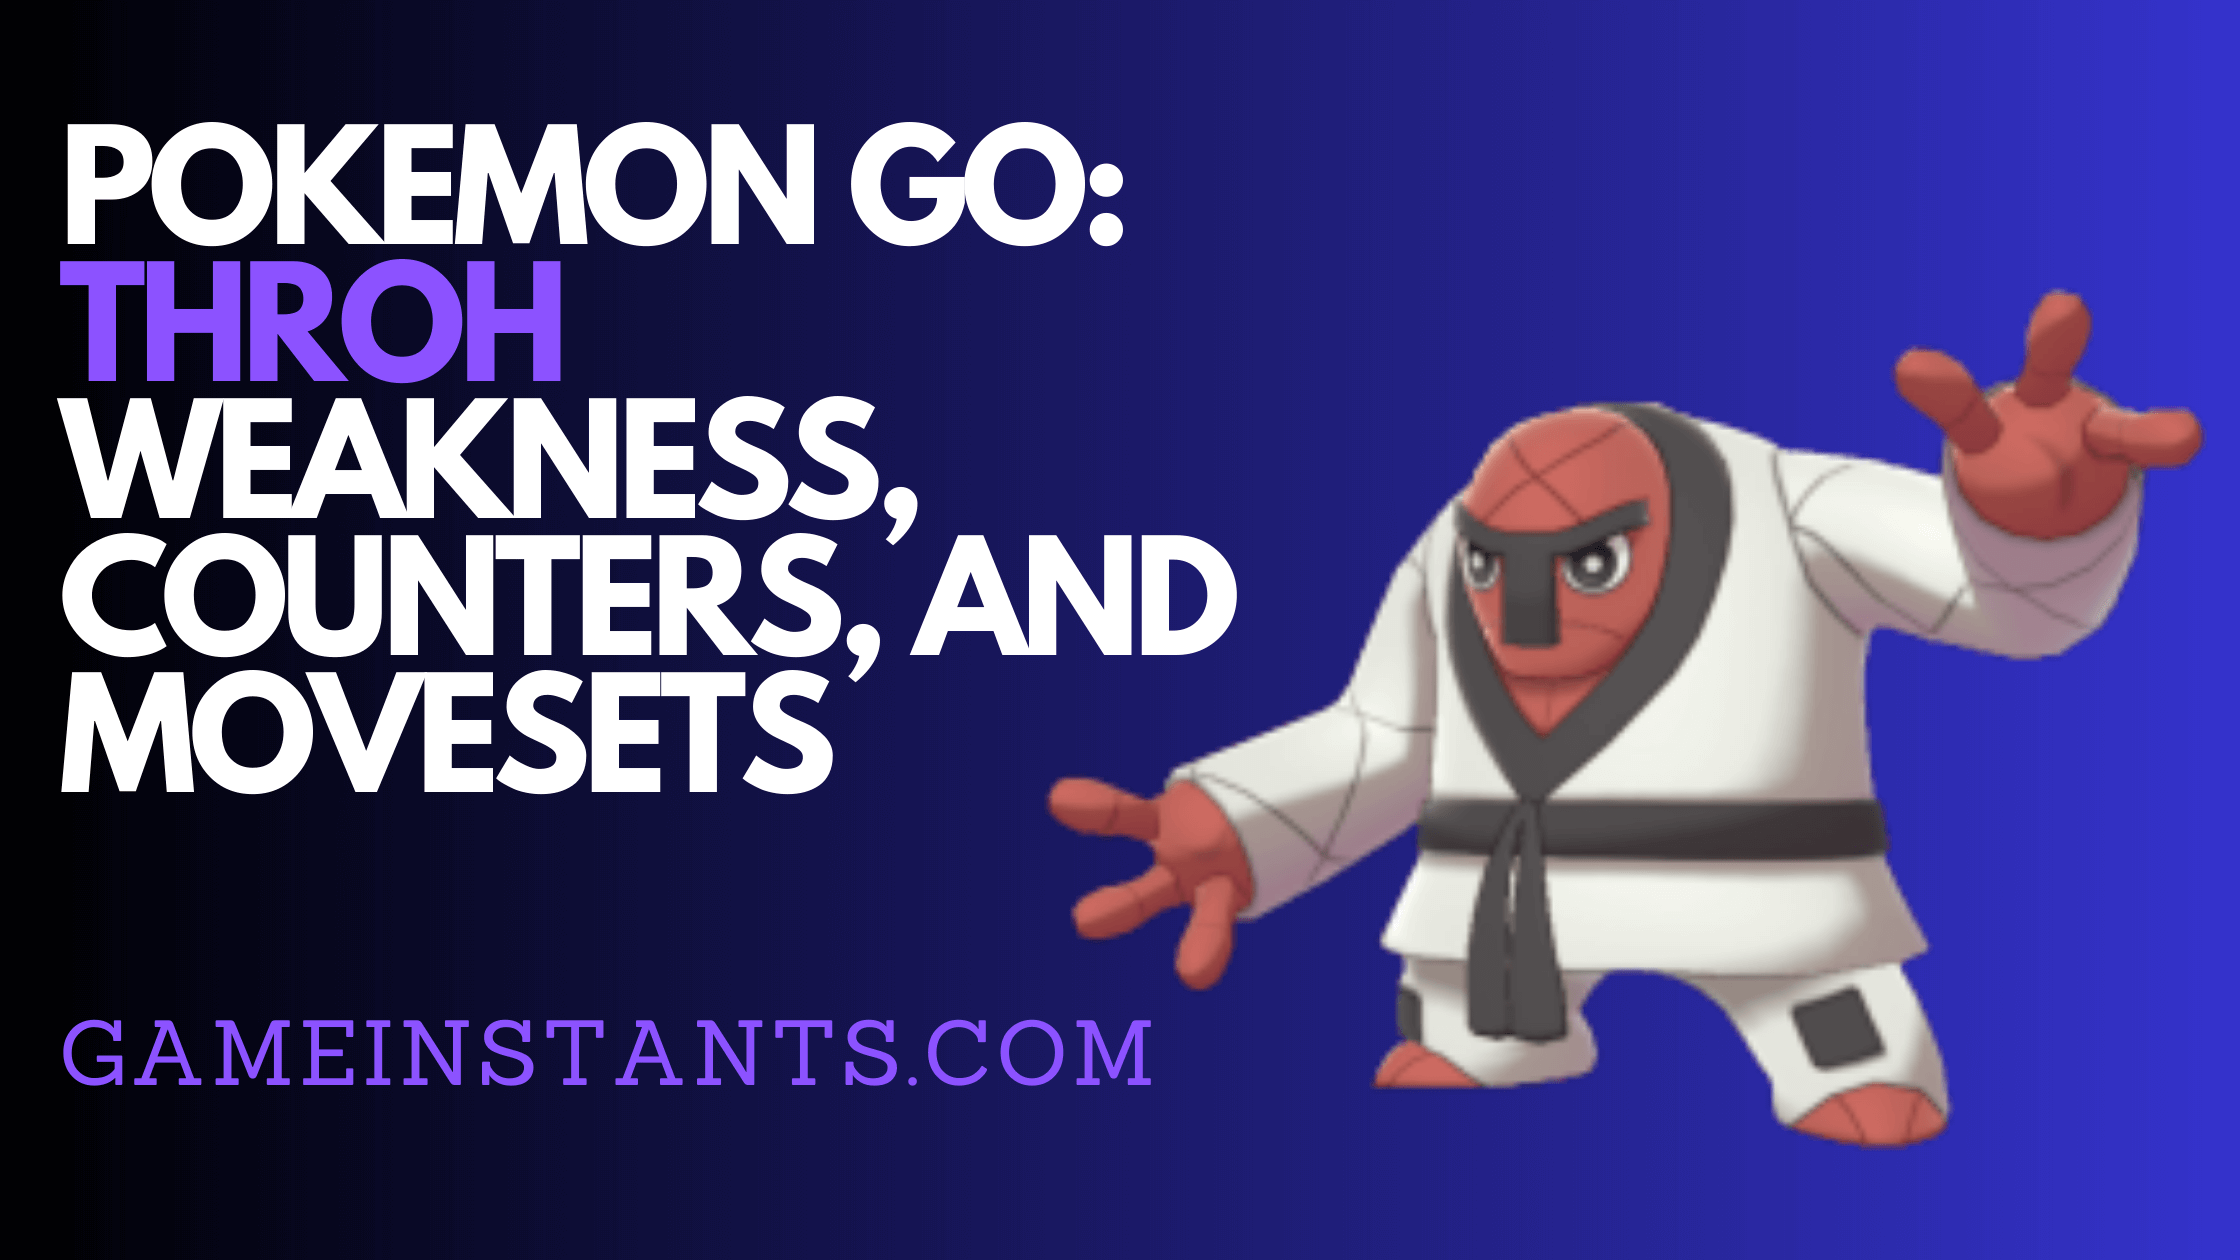 Pokemon Go Throh Weakness Counters Movesets